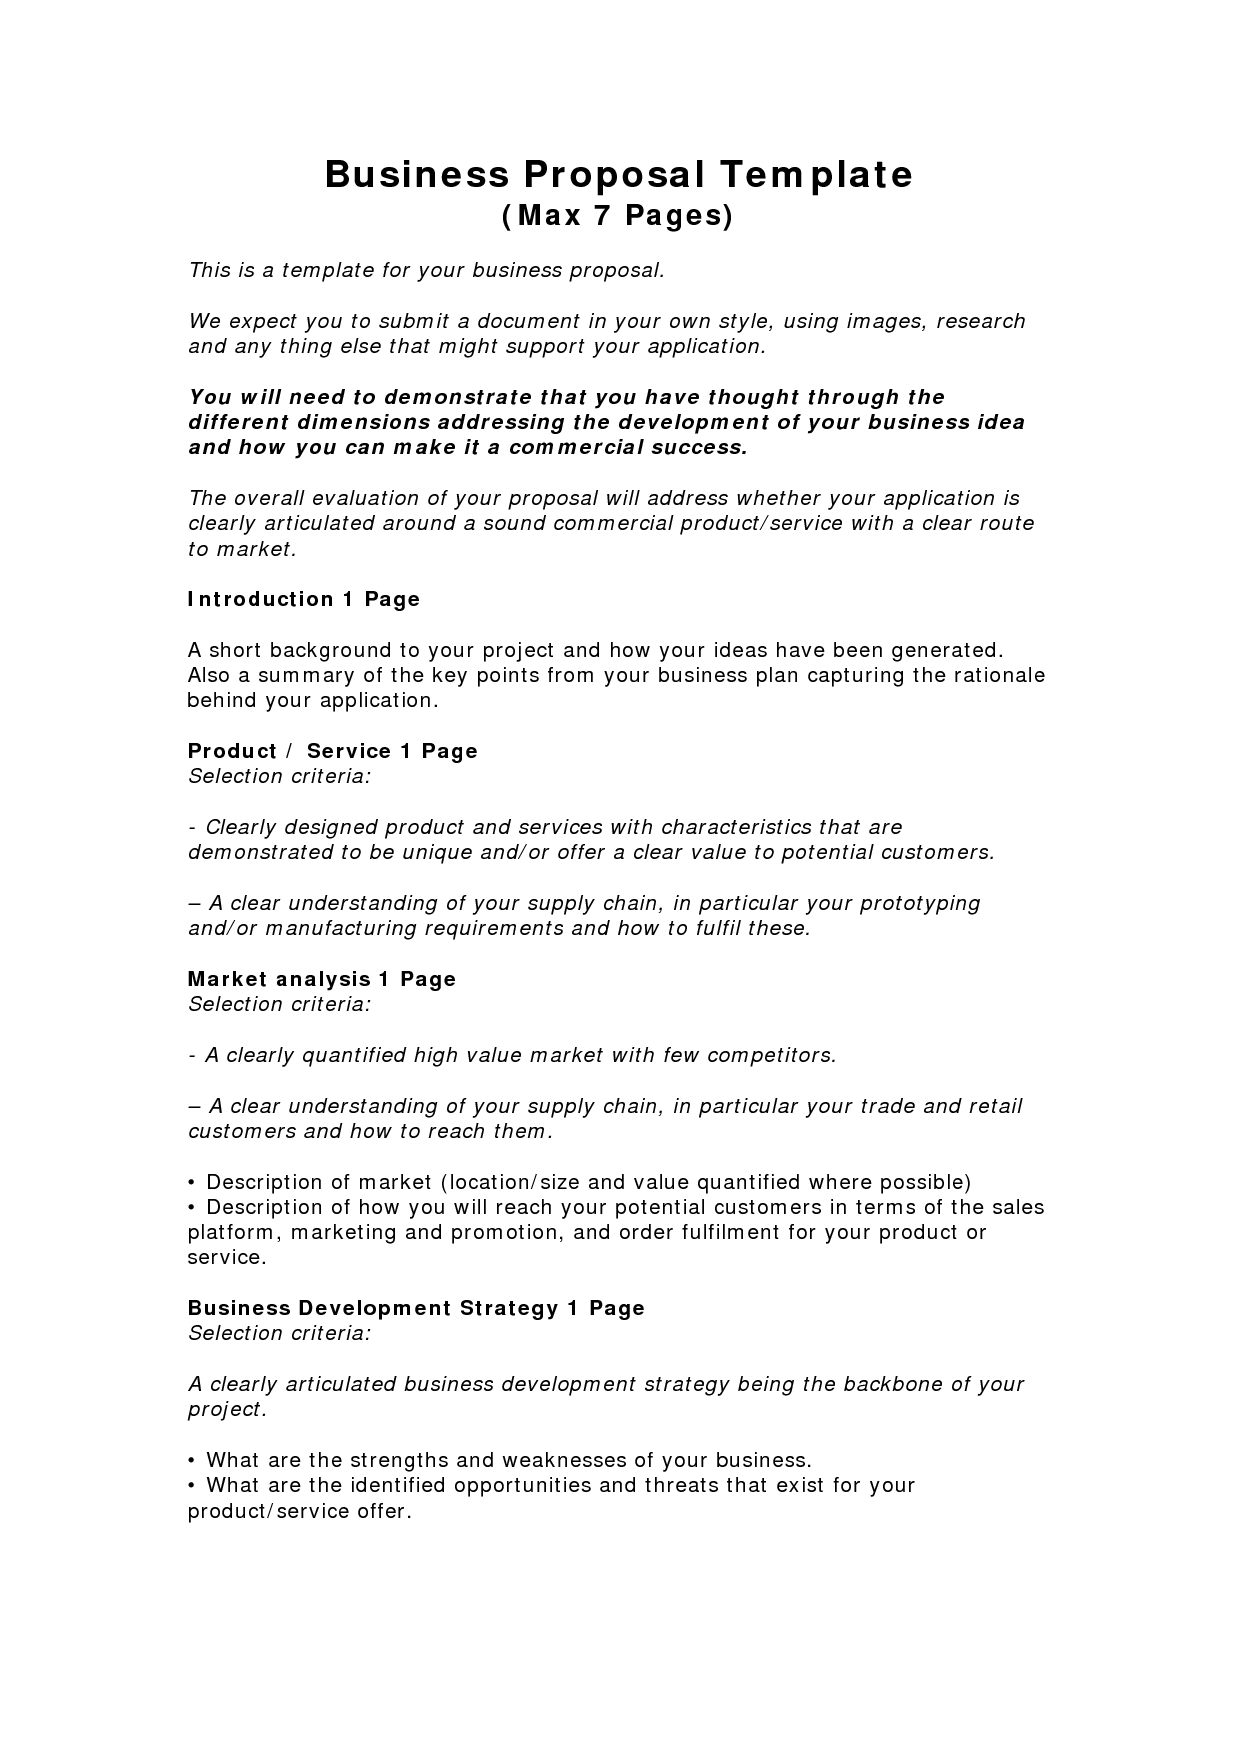 Business Proposal Templates Examples  Business Proposal Template with Short Proposal Template